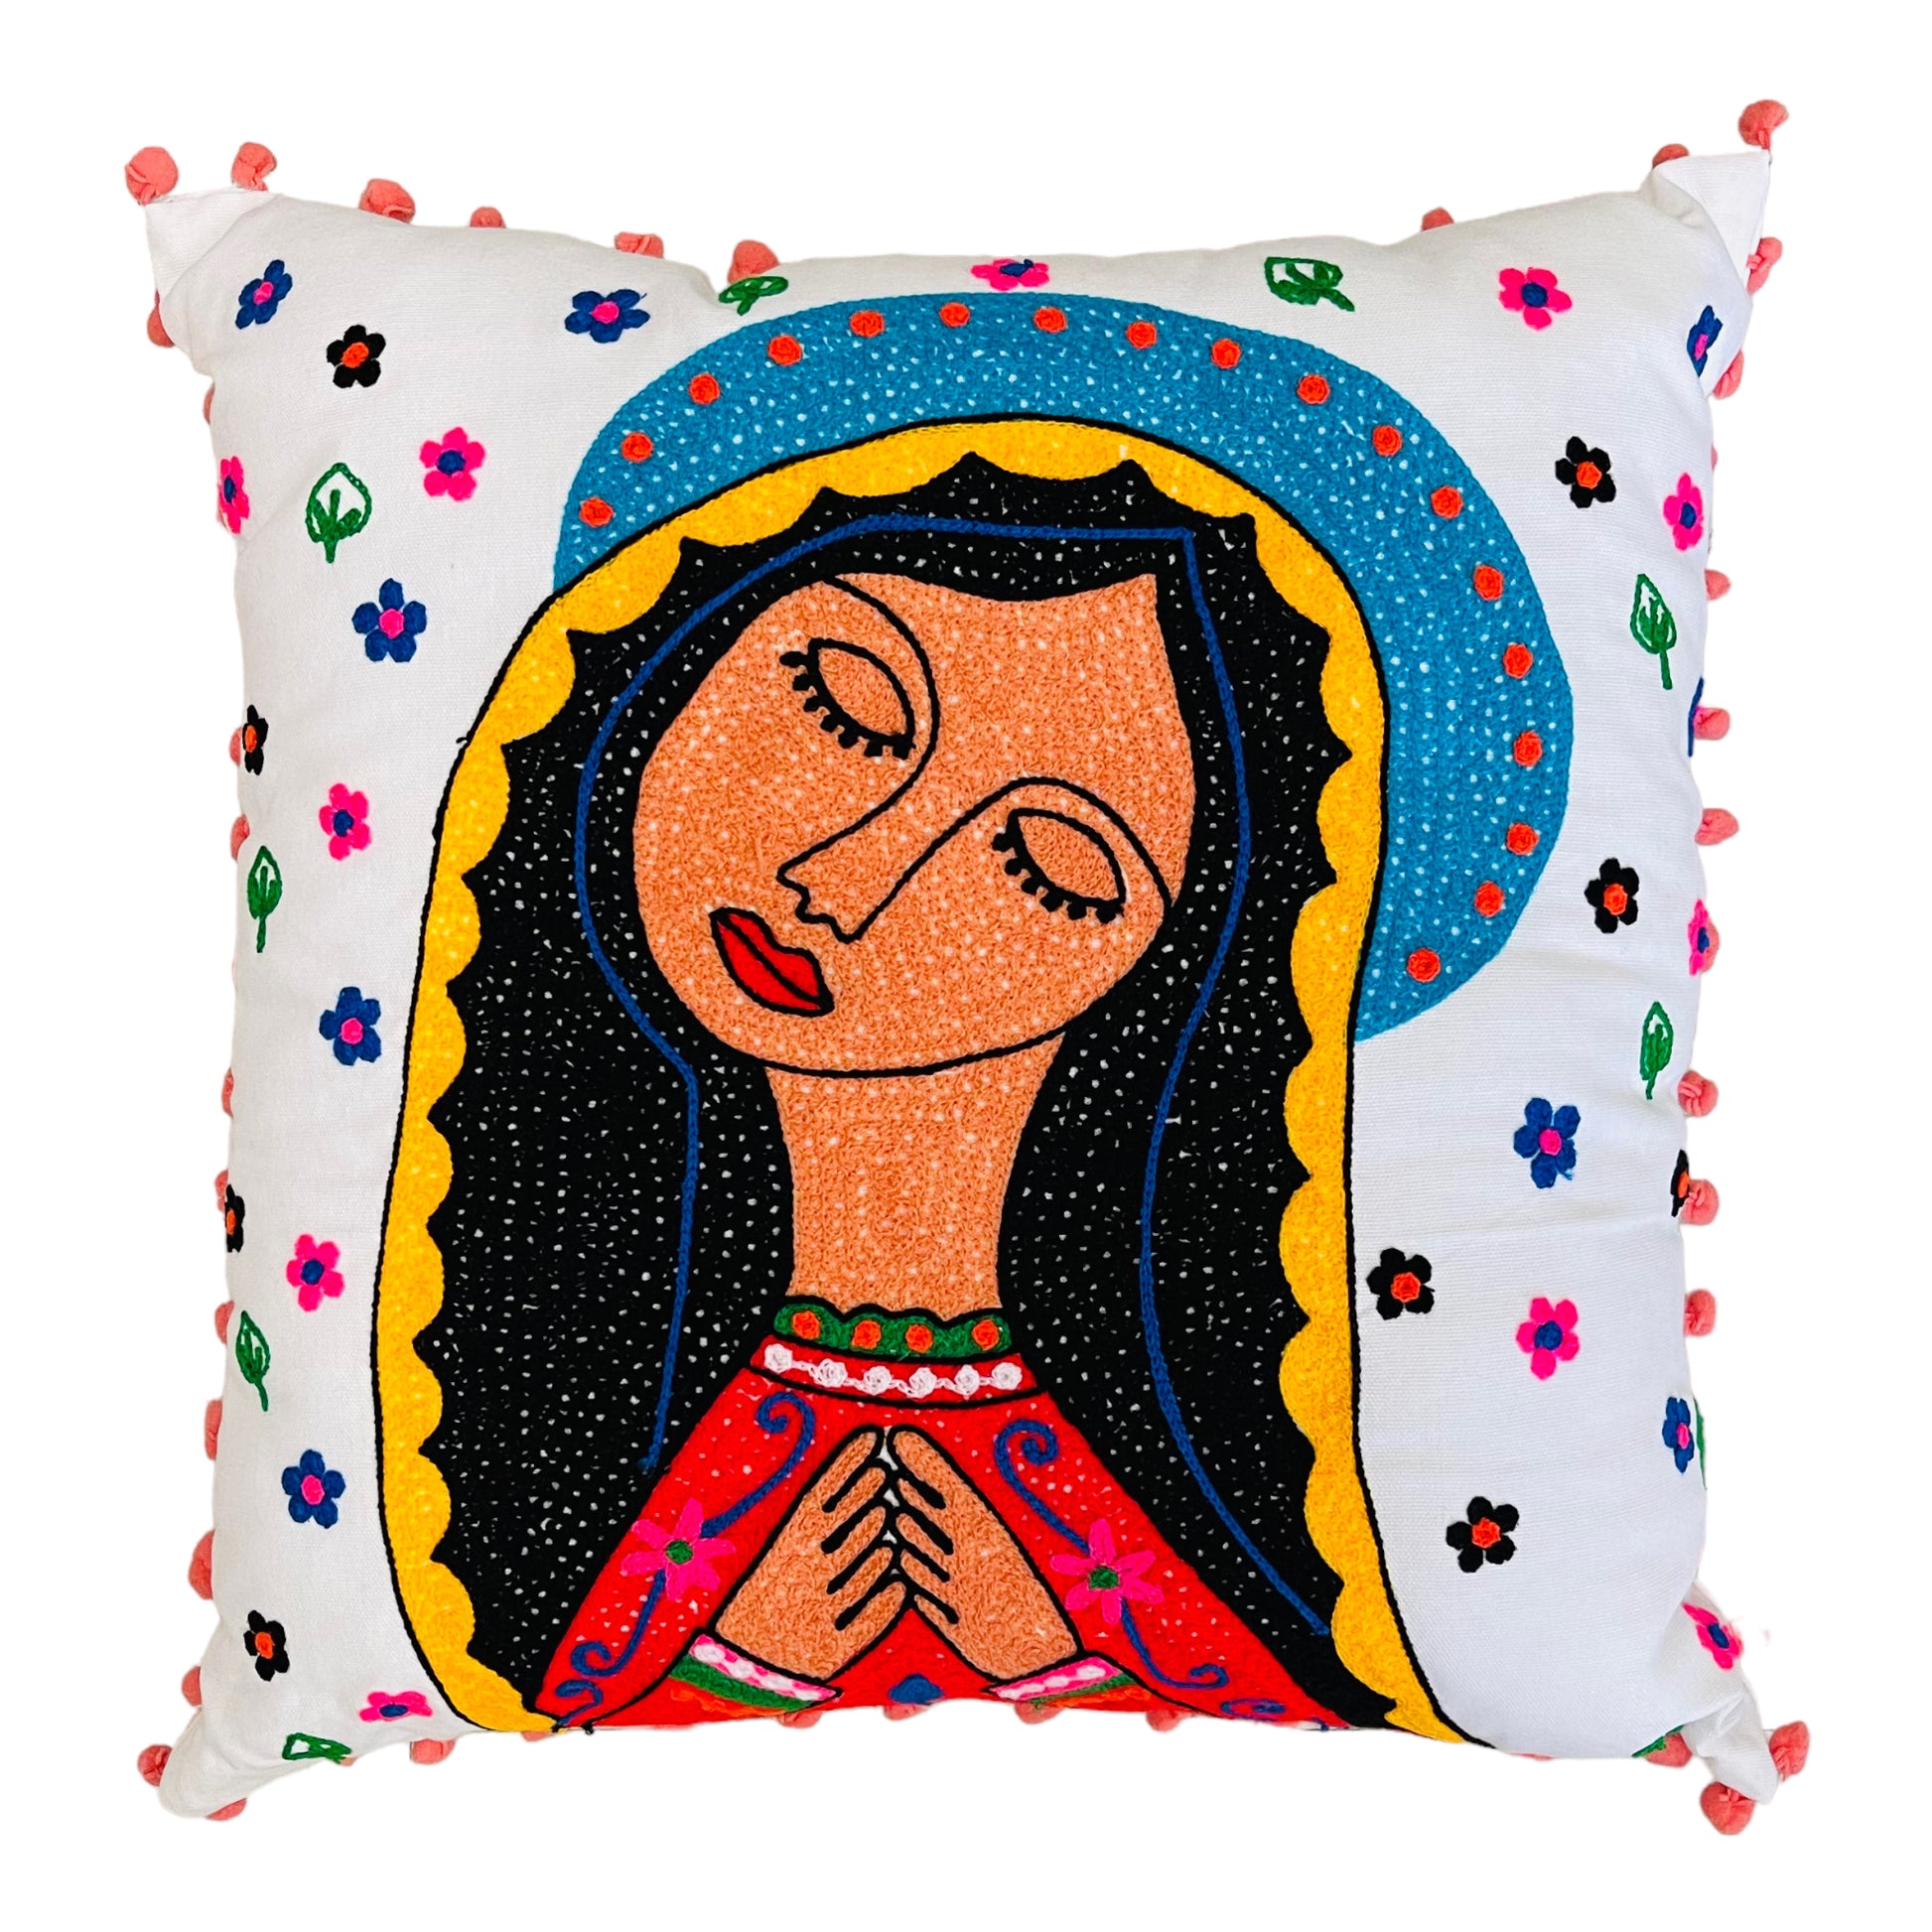 Hand embroidered white pillow with illustration of the virgin Guadalupe in different colors such as yellow, black, red and blue. Around the virgin are embroidered flowers and small green leaves. 